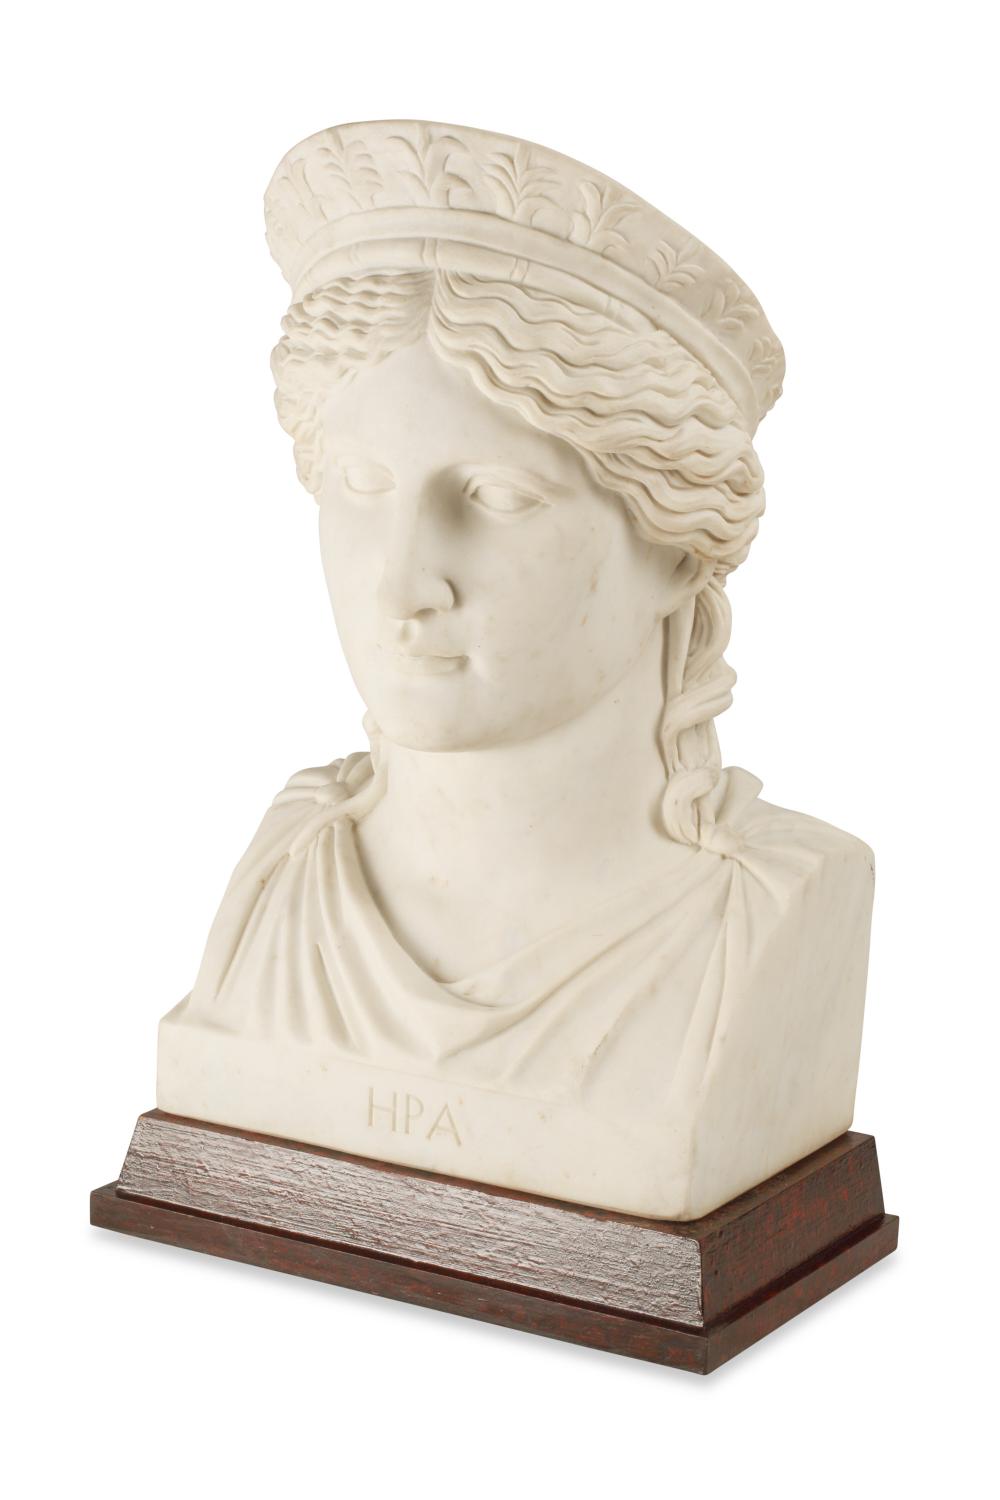 A NEOCLASSICAL STYLE MARBLE BUST 2dae06